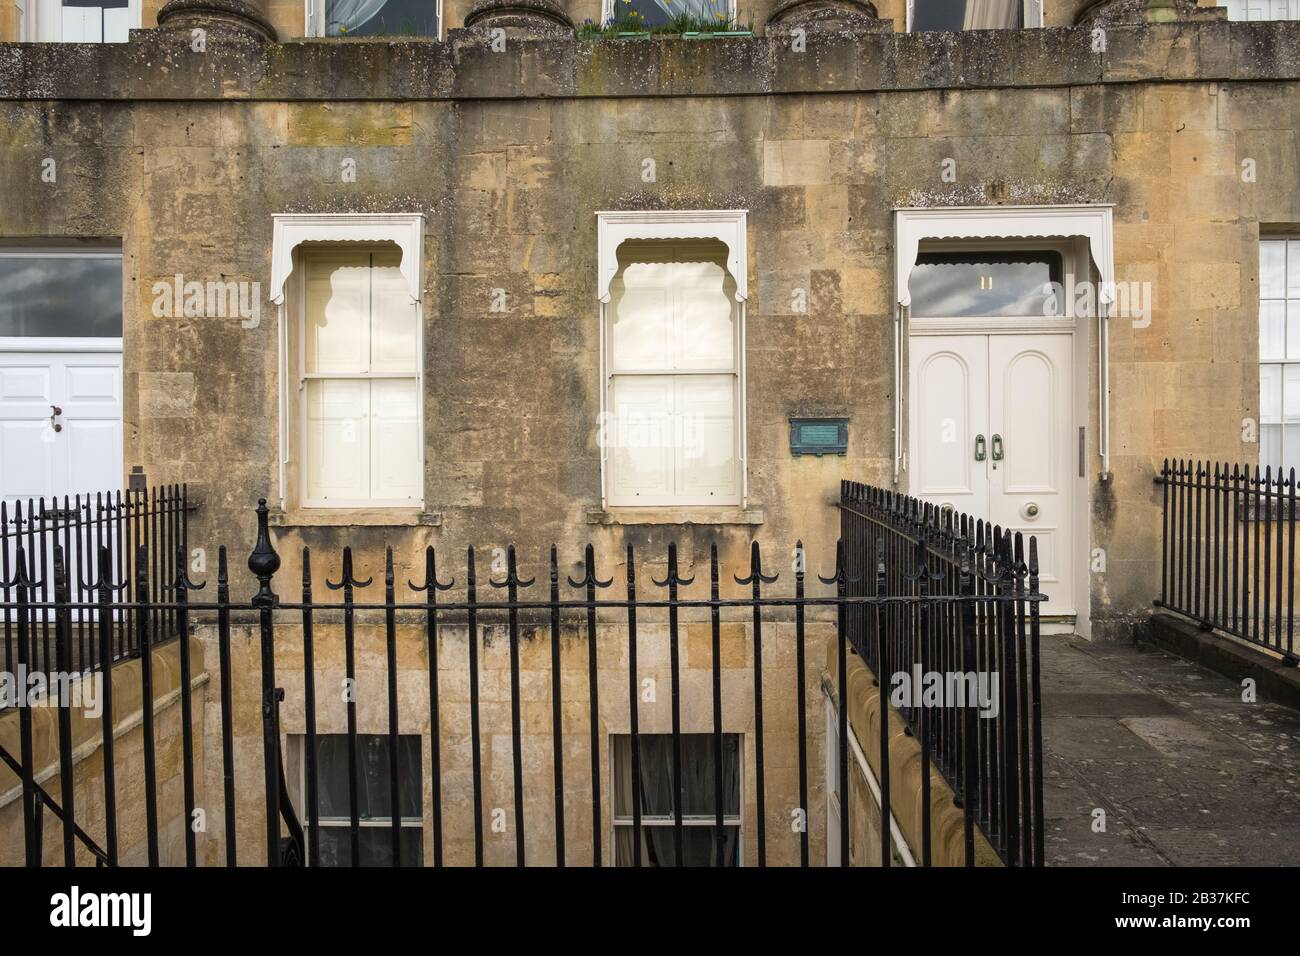 Royal Crescent in Bath, Somerset is famous for its curved row of Regency style homes overlooking the green Stock Photo